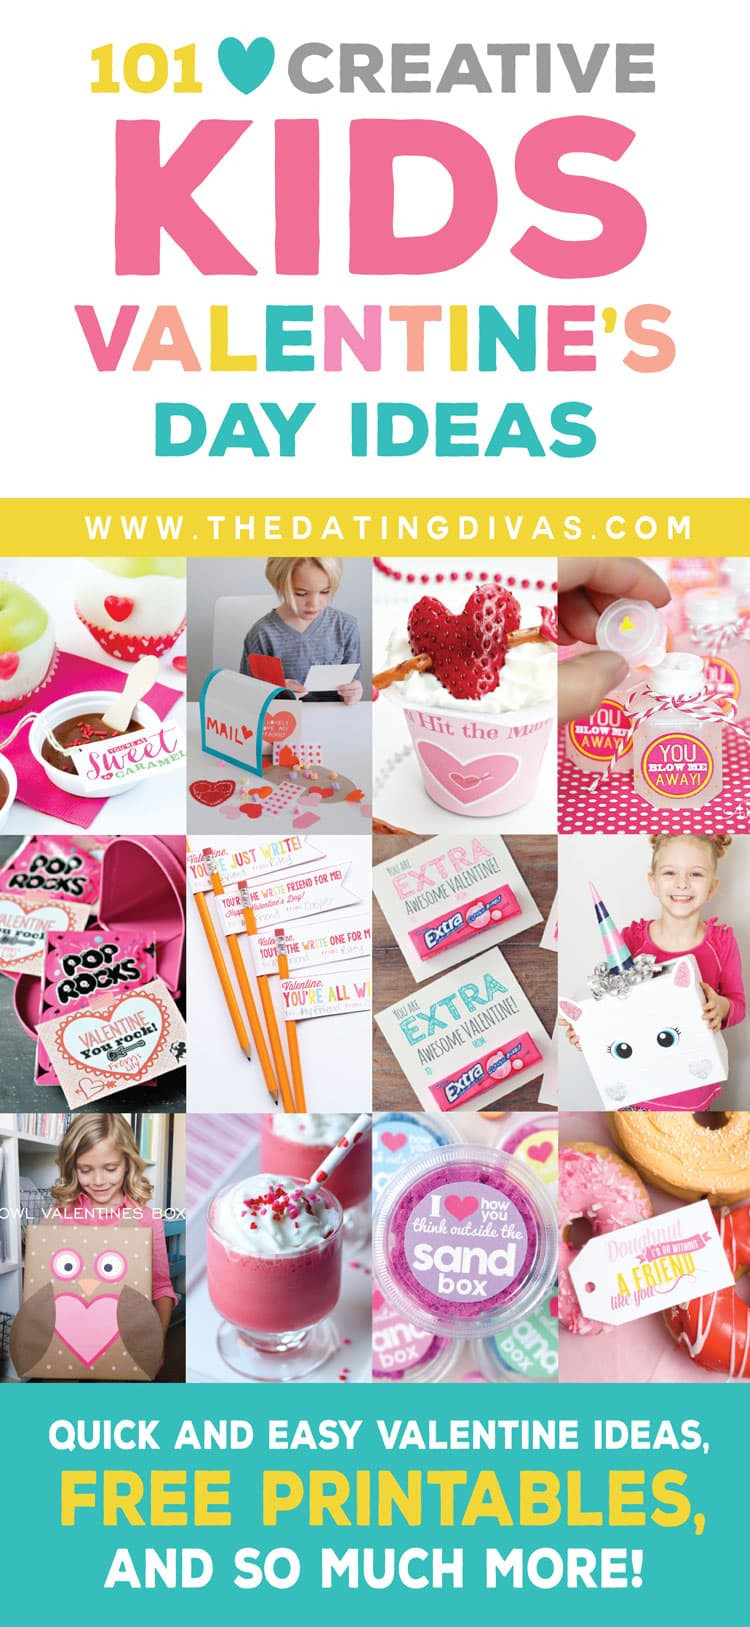 Valentine'S Day Gift Ideas For Kids
 Kids Valentine s Day Ideas From The Dating Divas